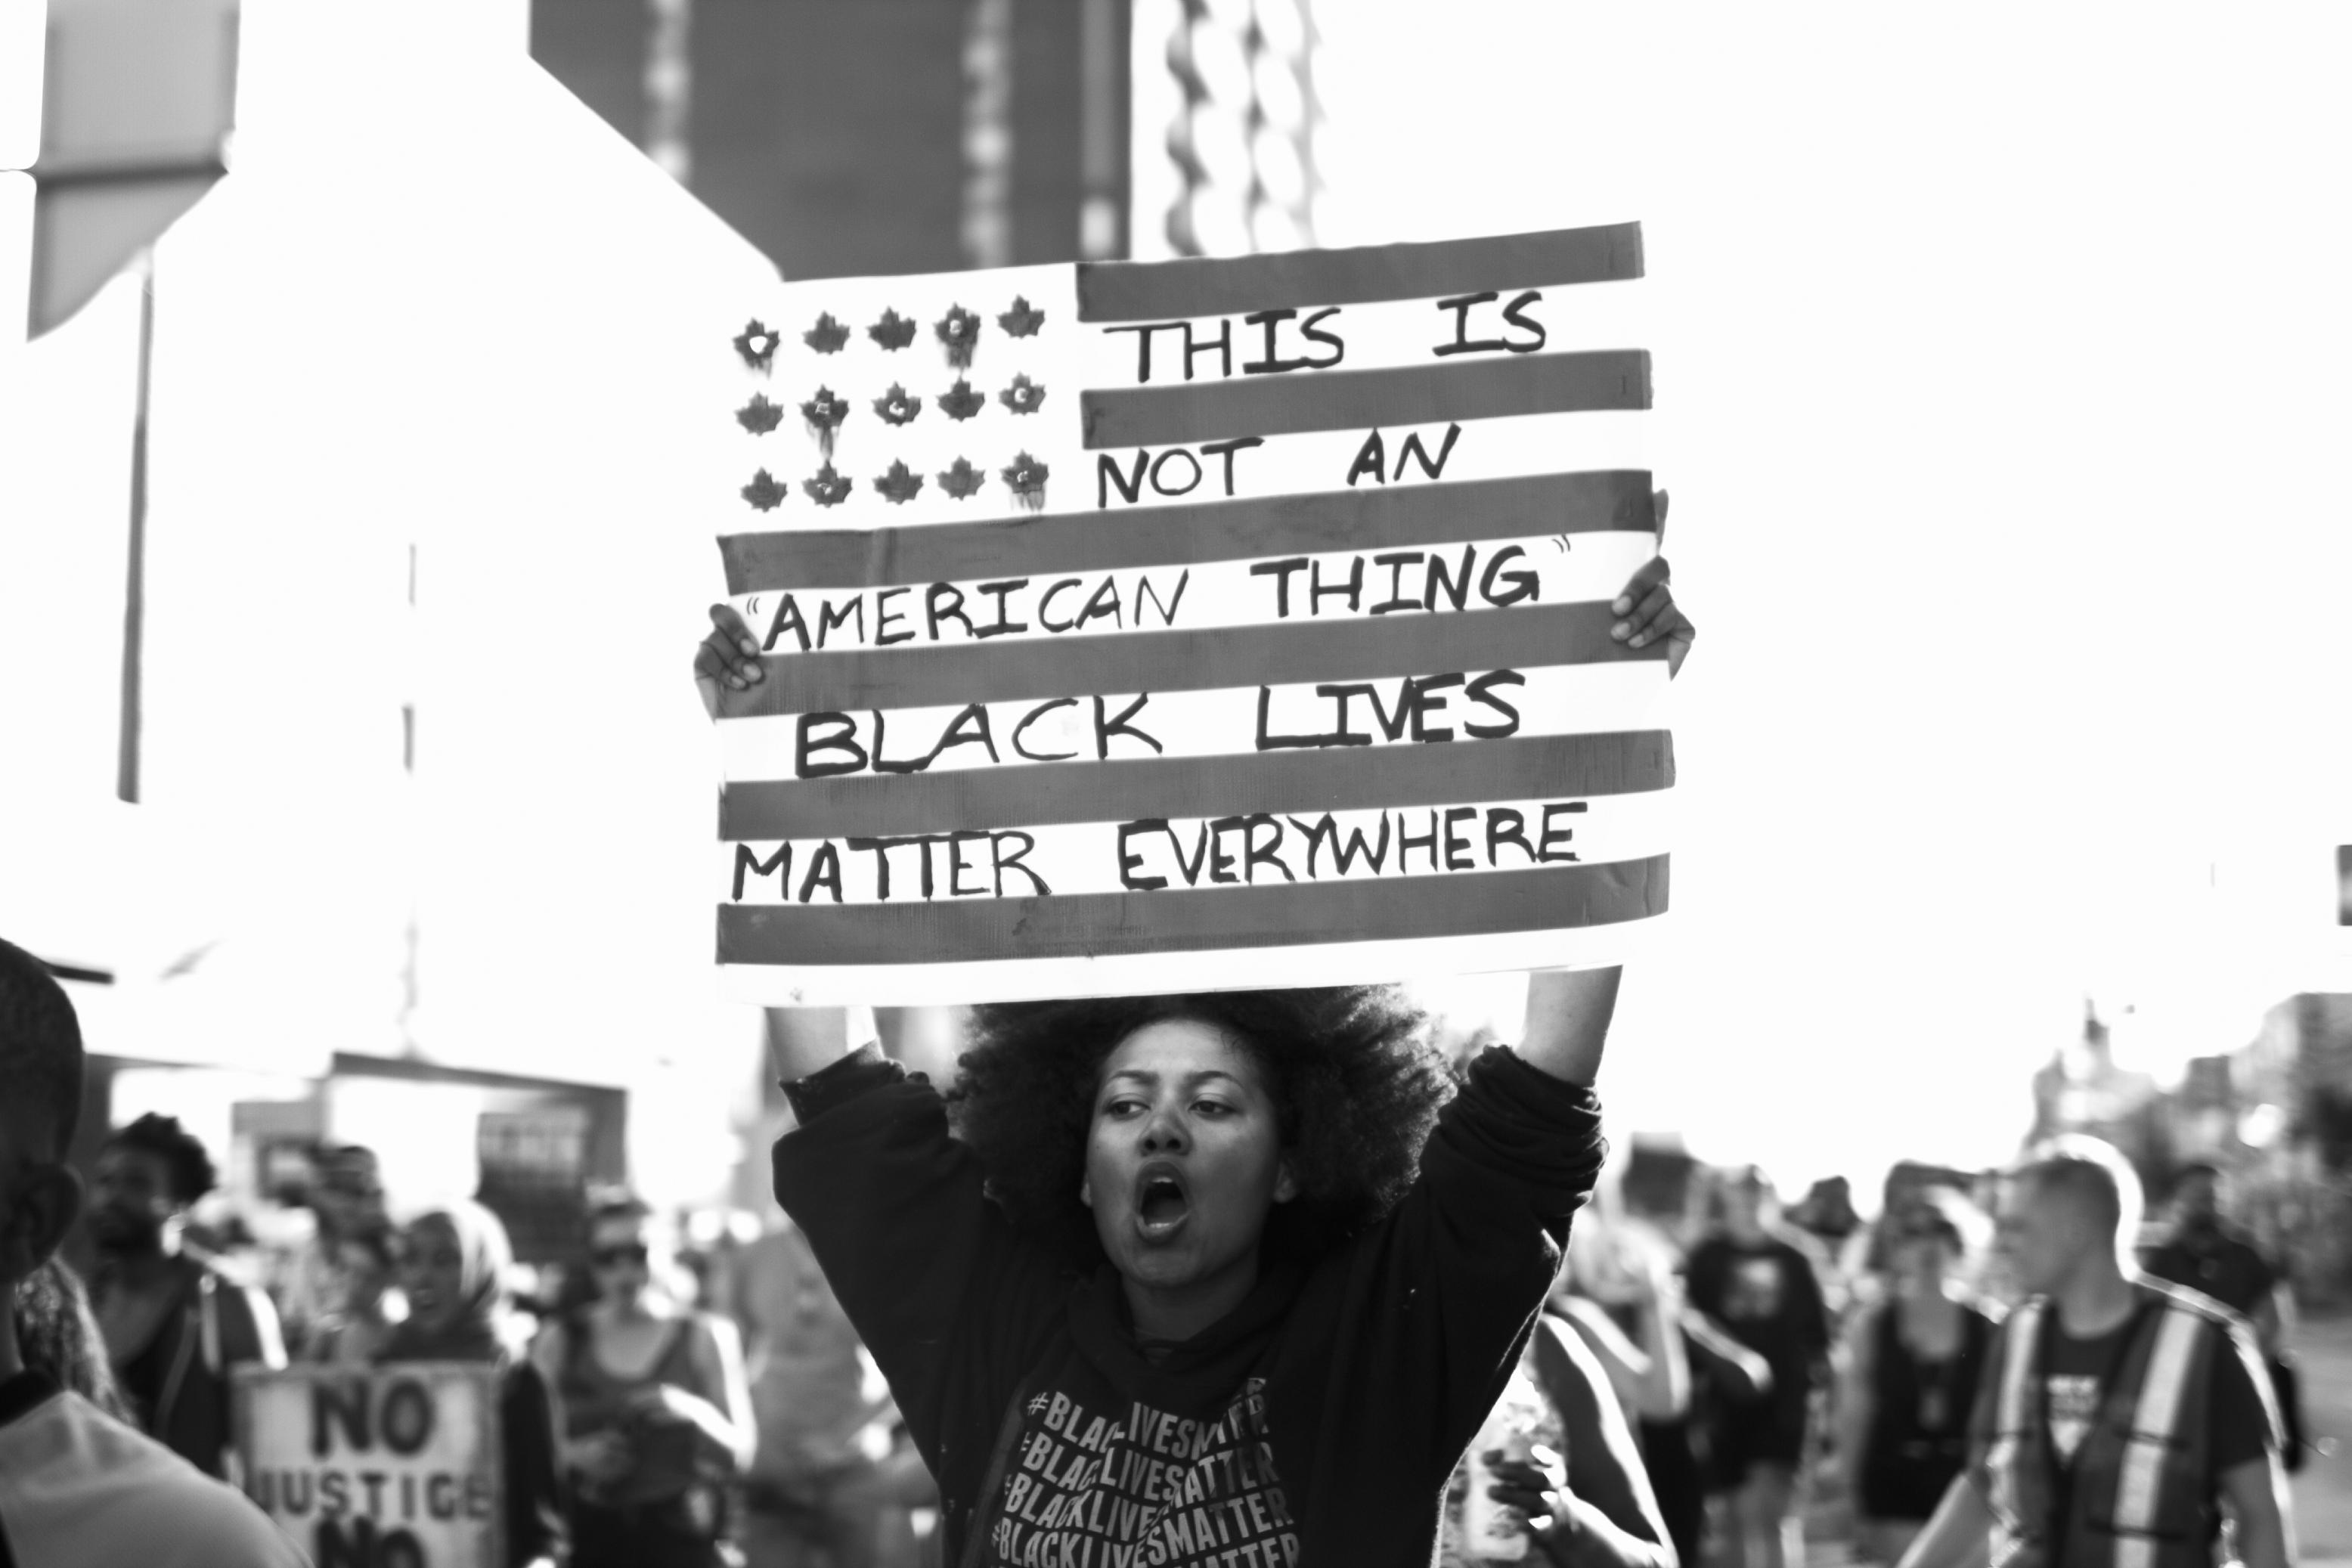 Jalani Morgan: Untitled, Toronto (2015). Anti-Blackness is global, as is our resistance. A marcher at a 2015 protest raises a sign to reinforce that state violence and oppression isn’t exclusive to America.